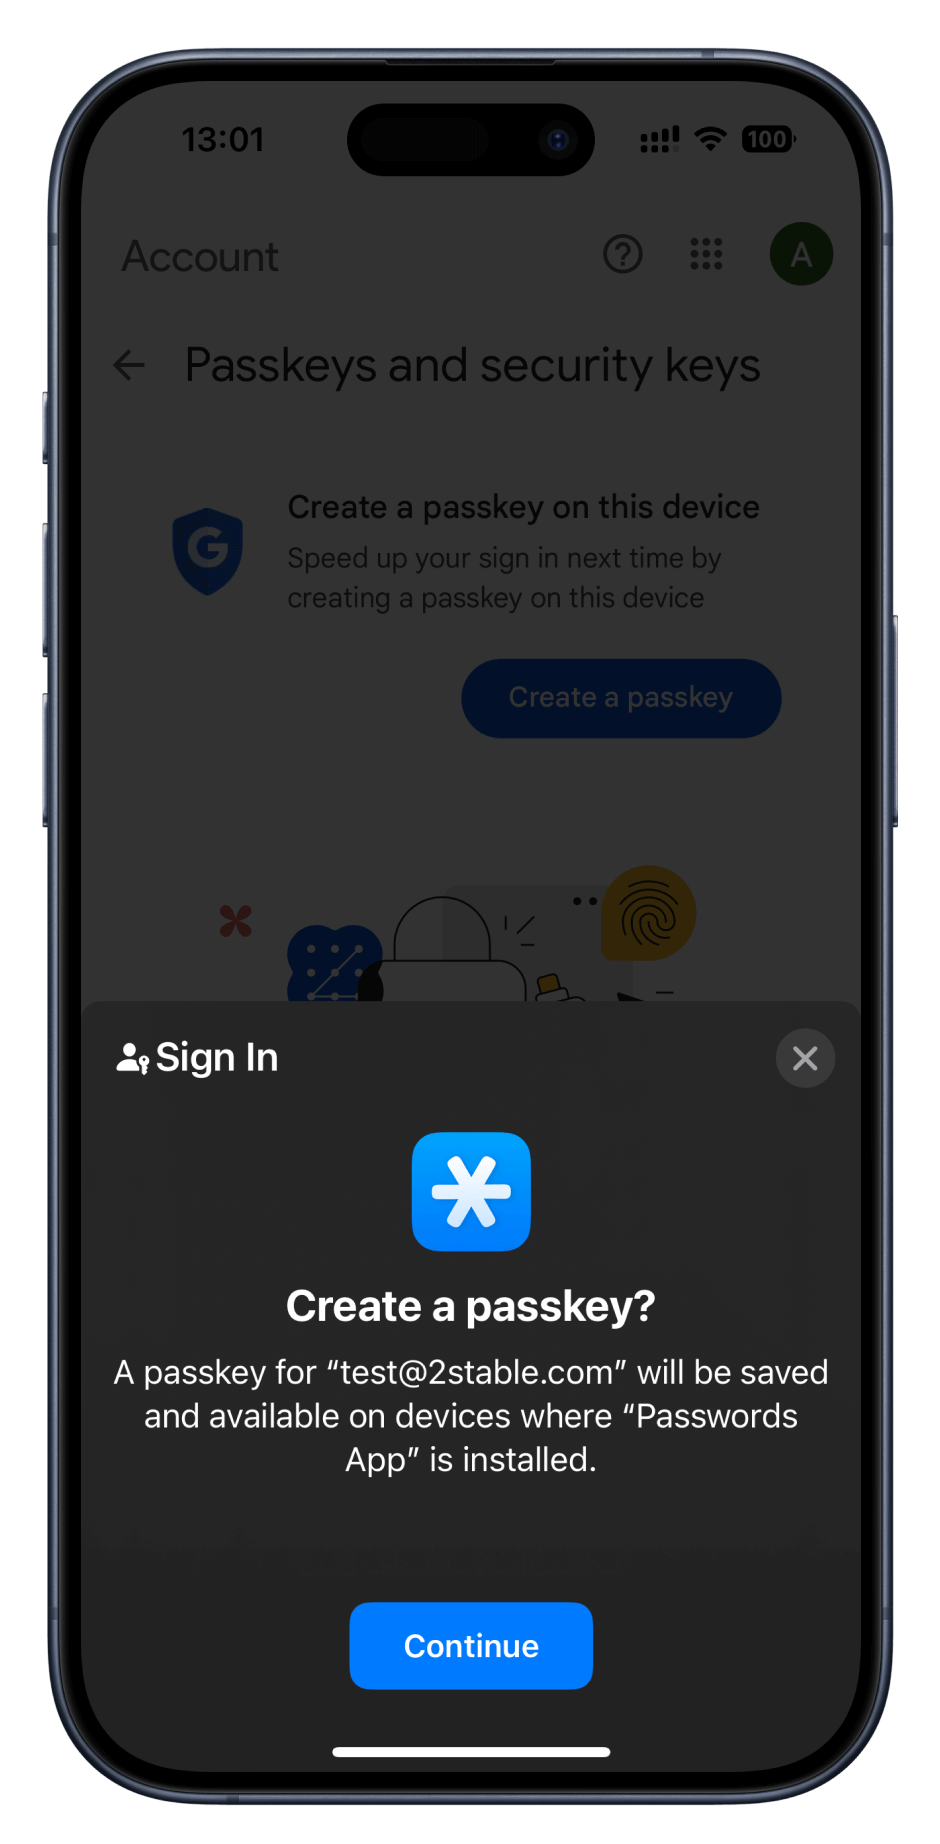 how to add a passkey - continue